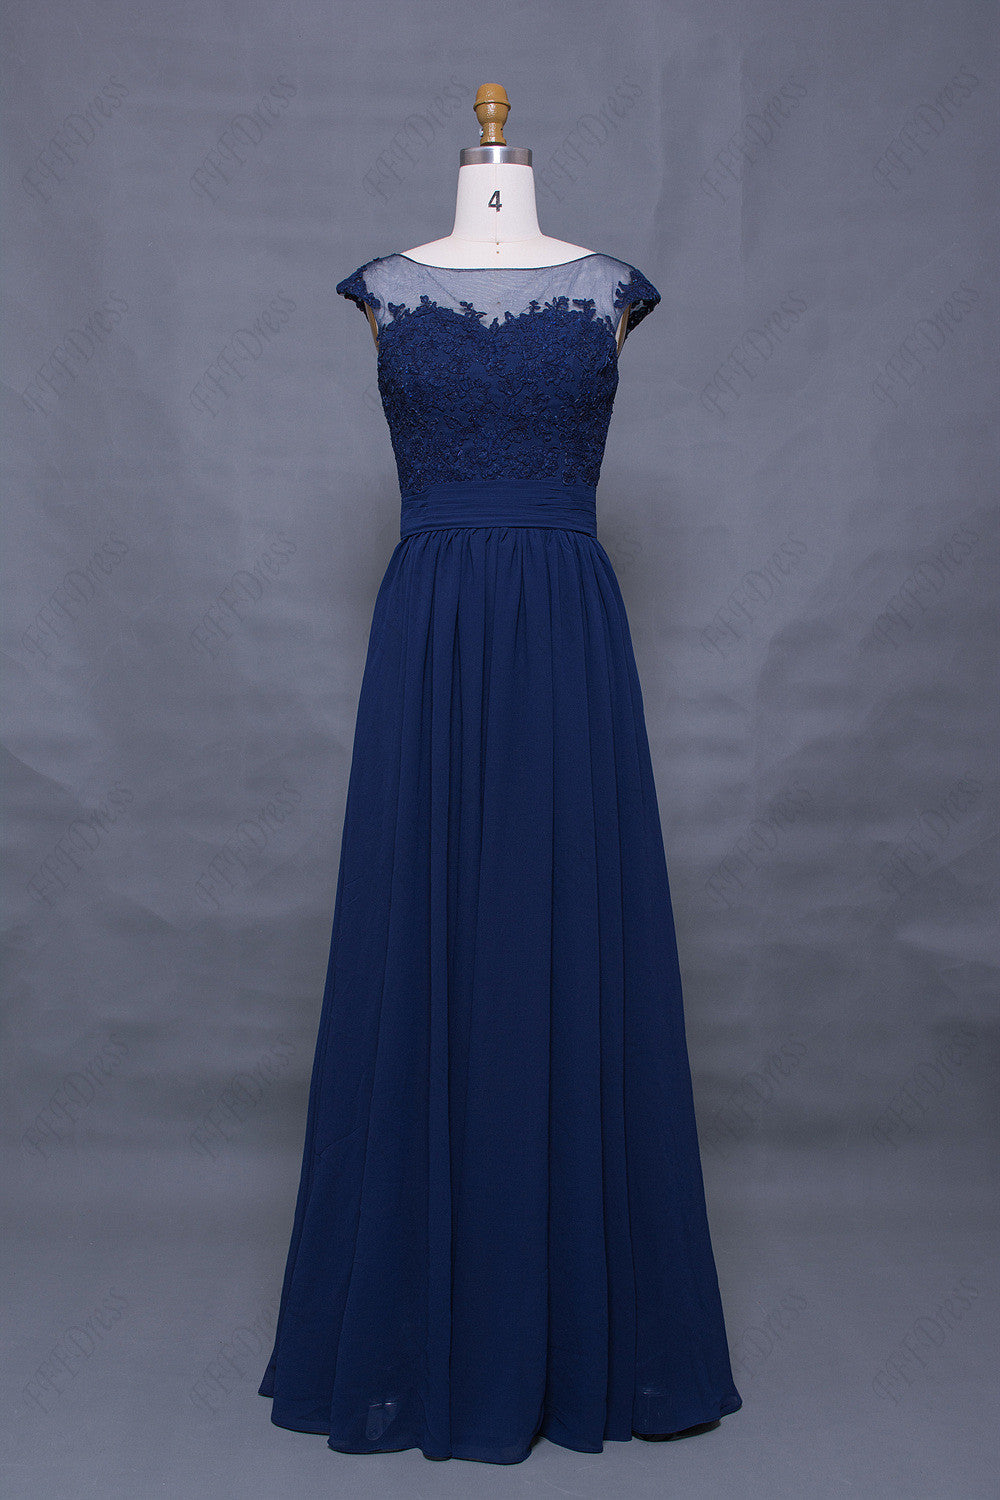 Lace modest navy blue prom dress cap sleeves long